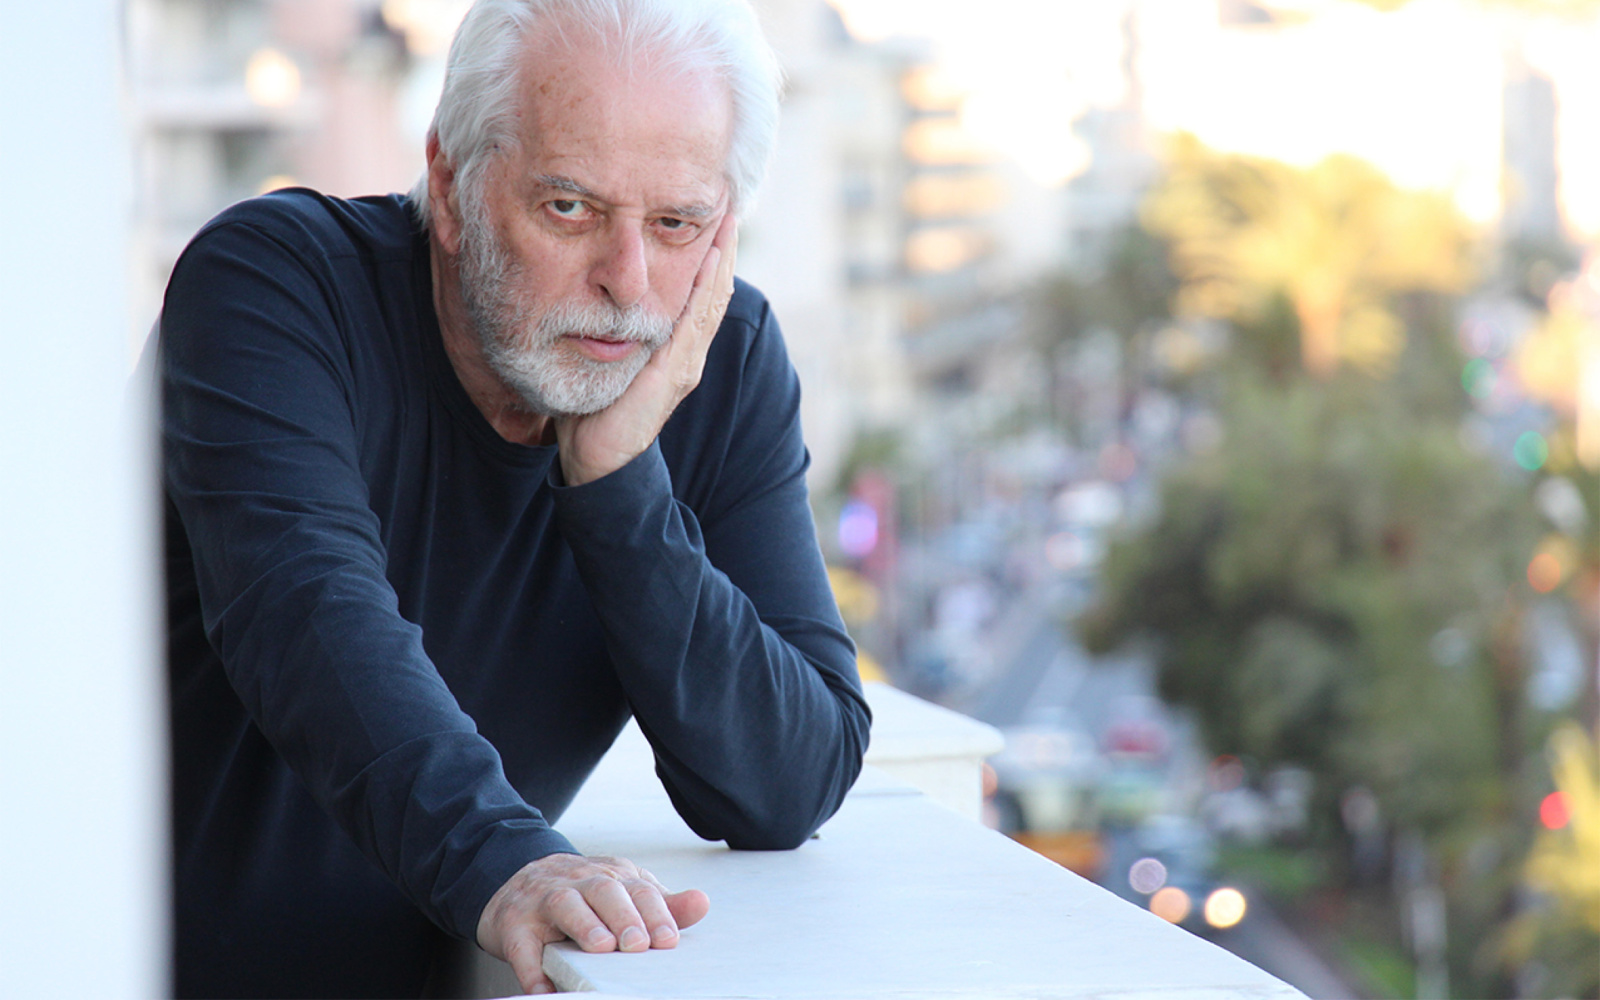 A man leans on a railing. He is wearing a dark sweater. His hair and beard are gray.